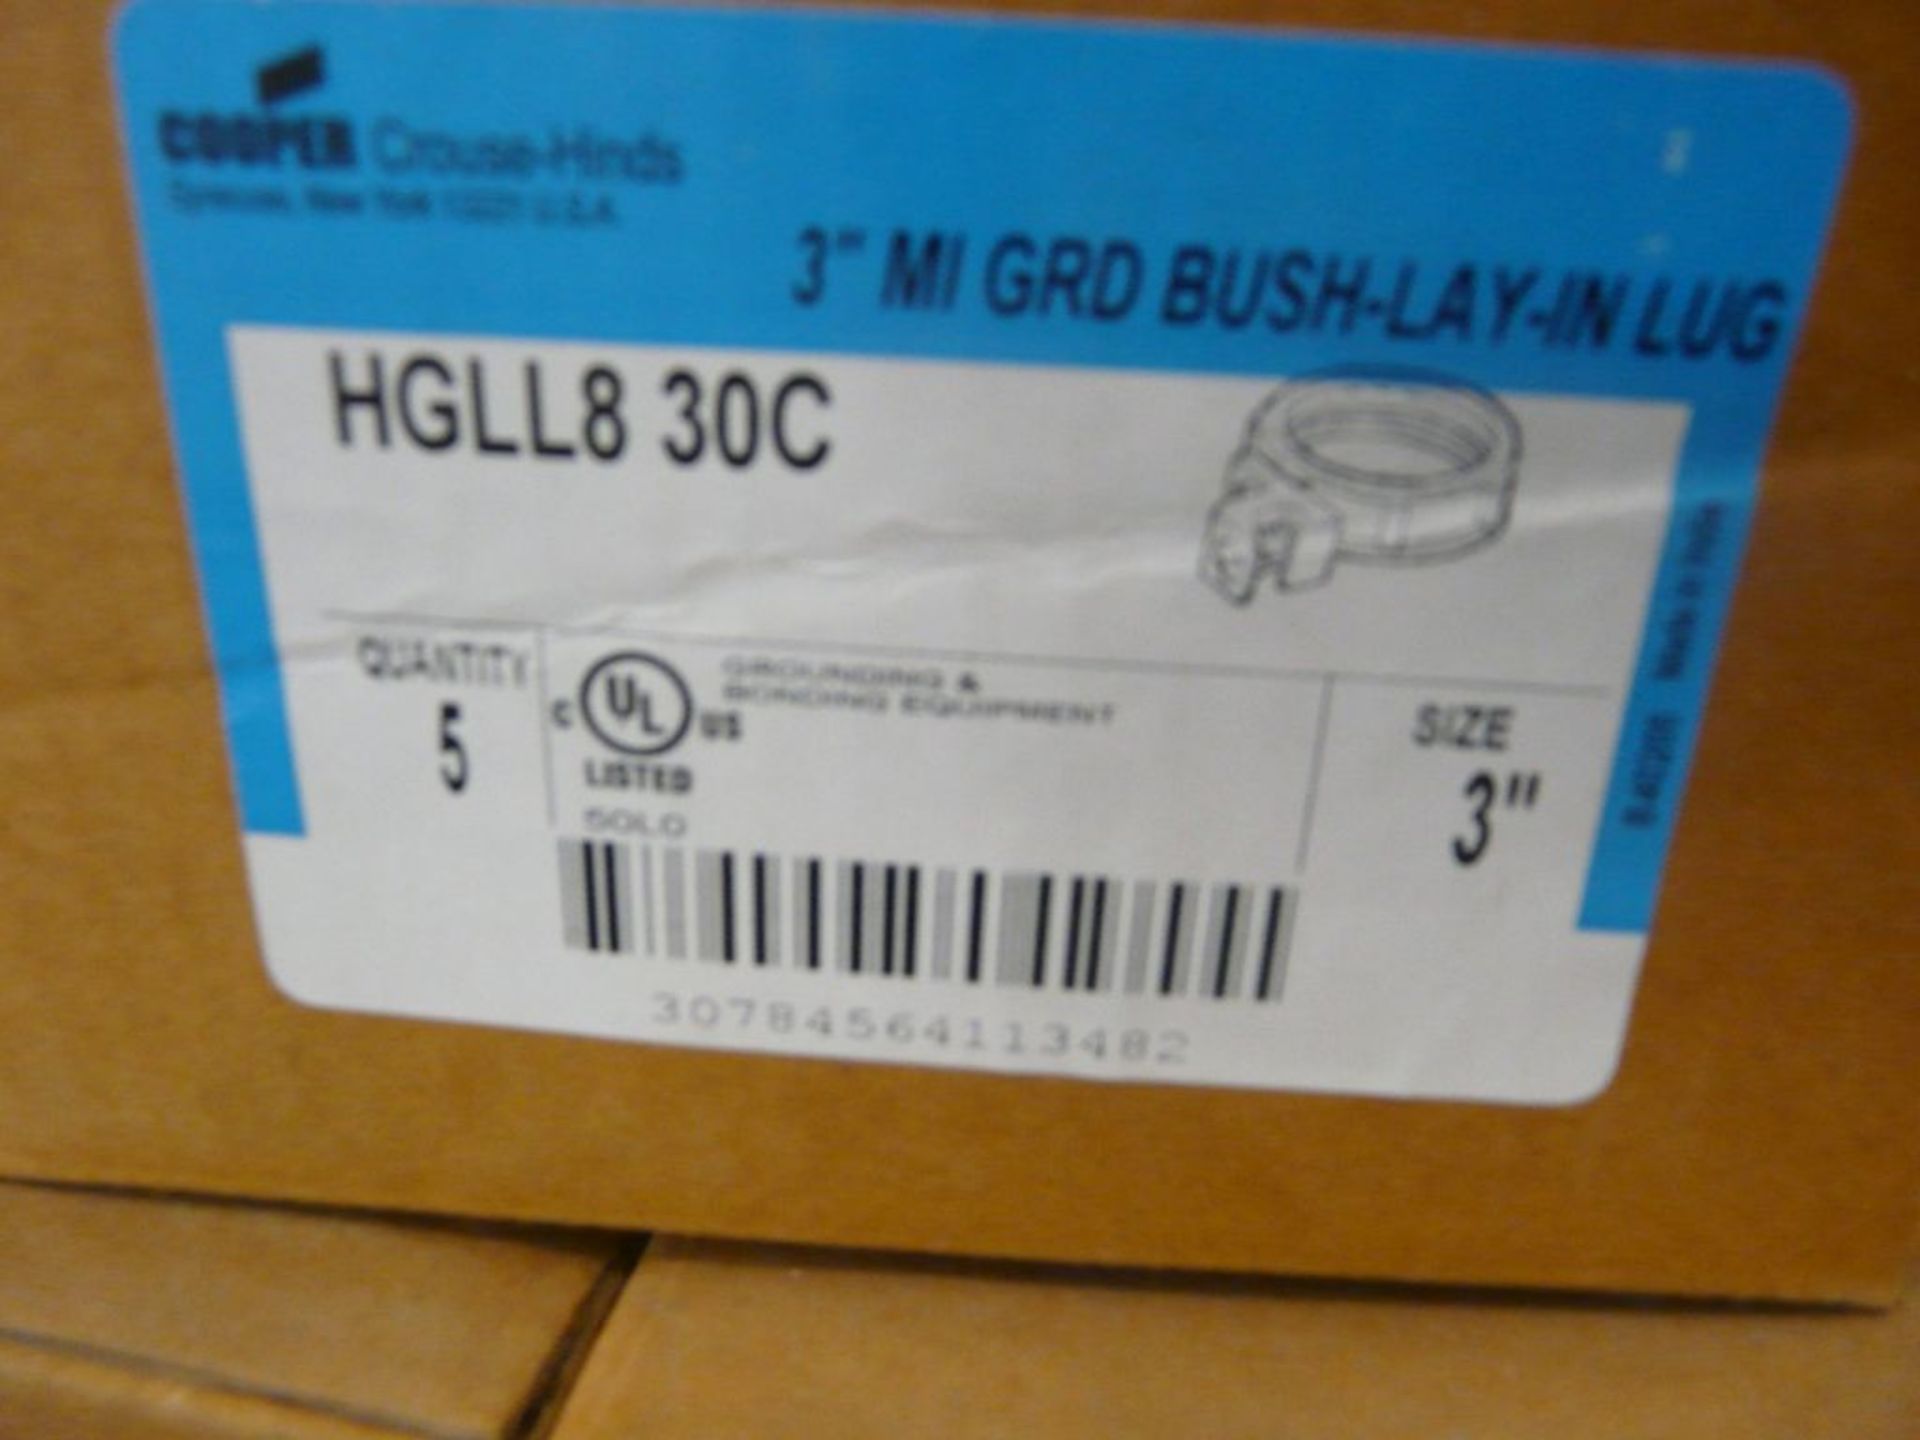 Lot of Approx (450) Cooper 3" Grounding Bushings | Part No. HGLL8 30C; New Surplus - Image 3 of 5